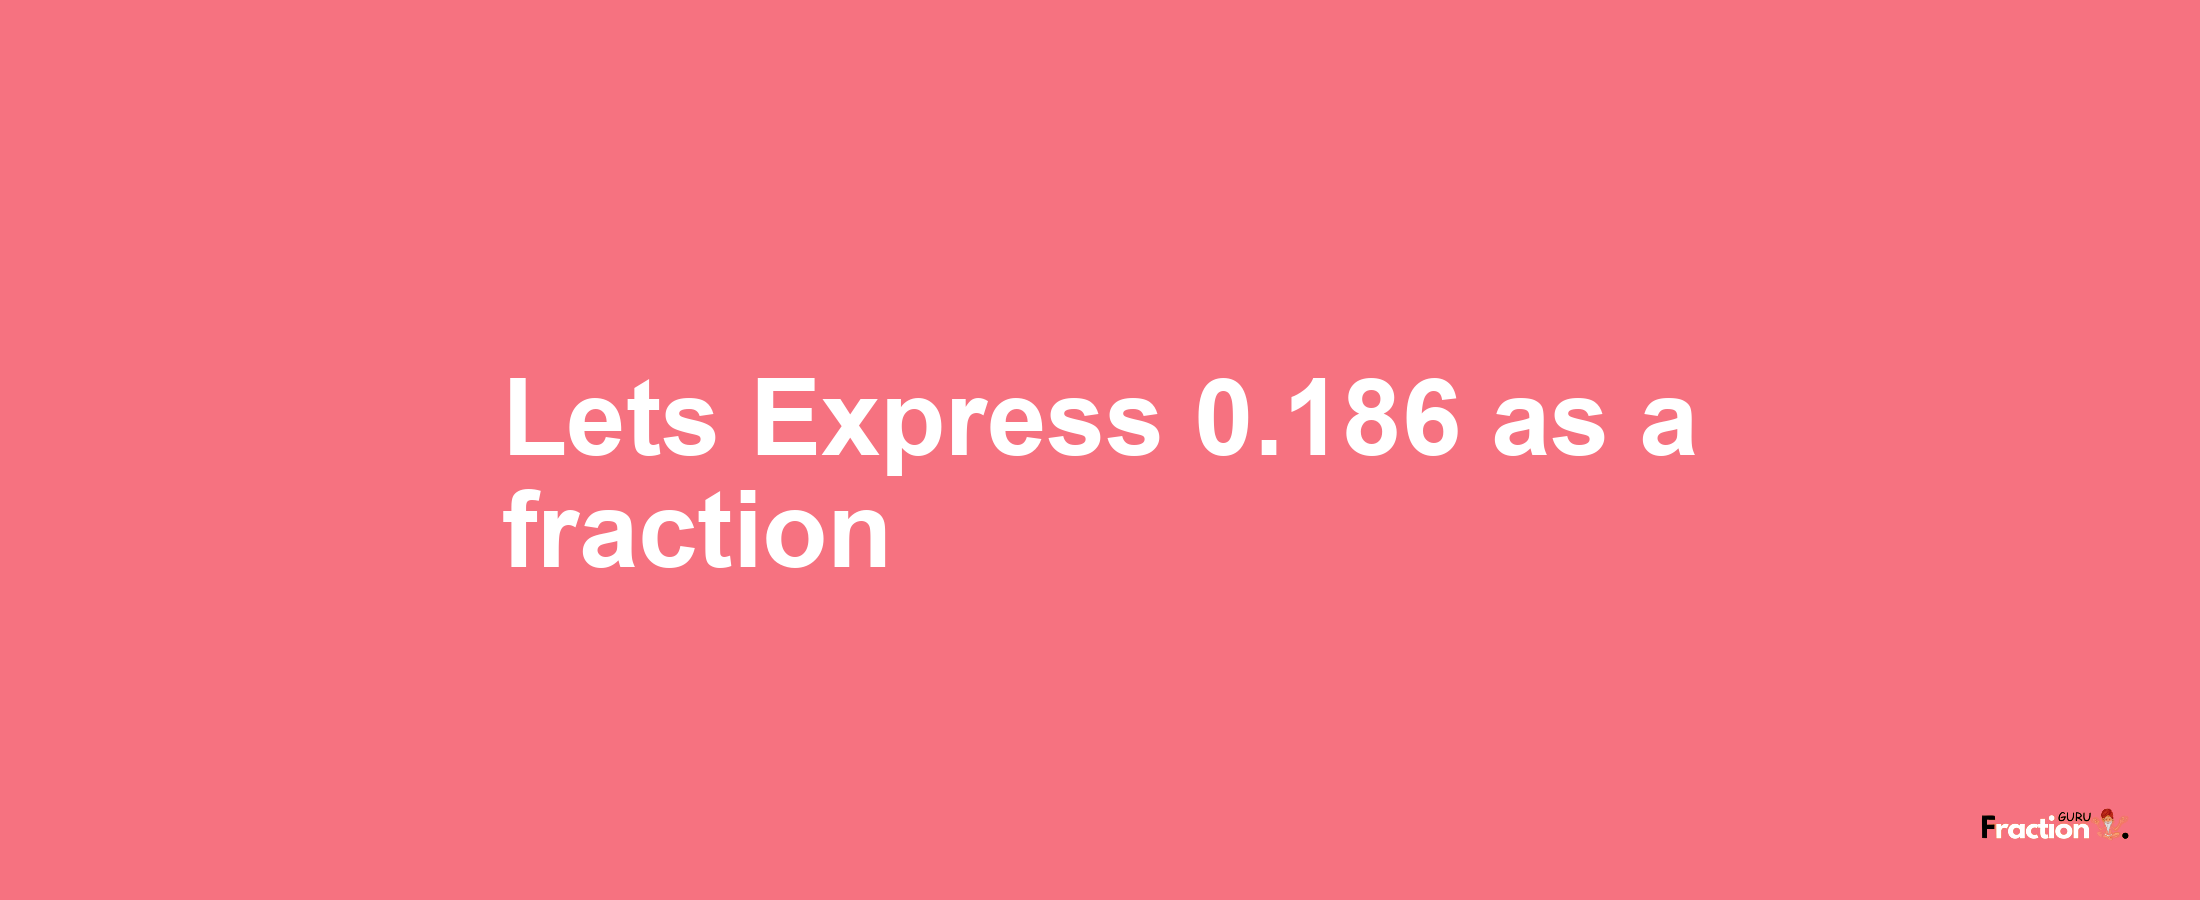 Lets Express 0.186 as afraction